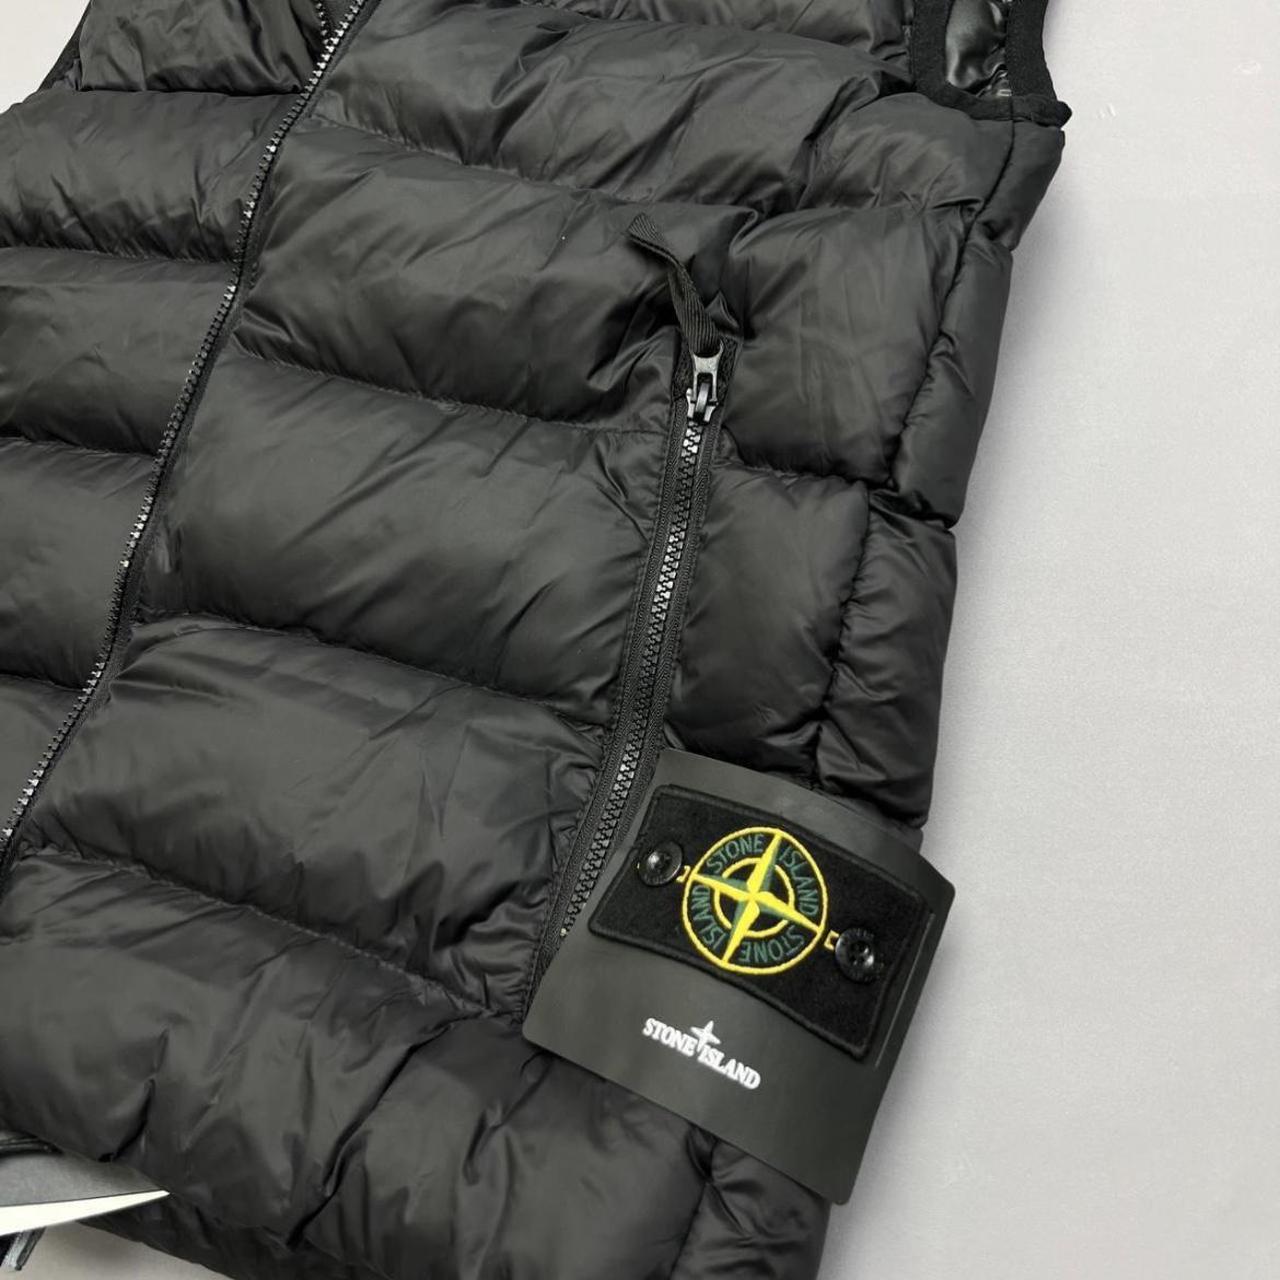 Stone island gilet message if interested - Depop